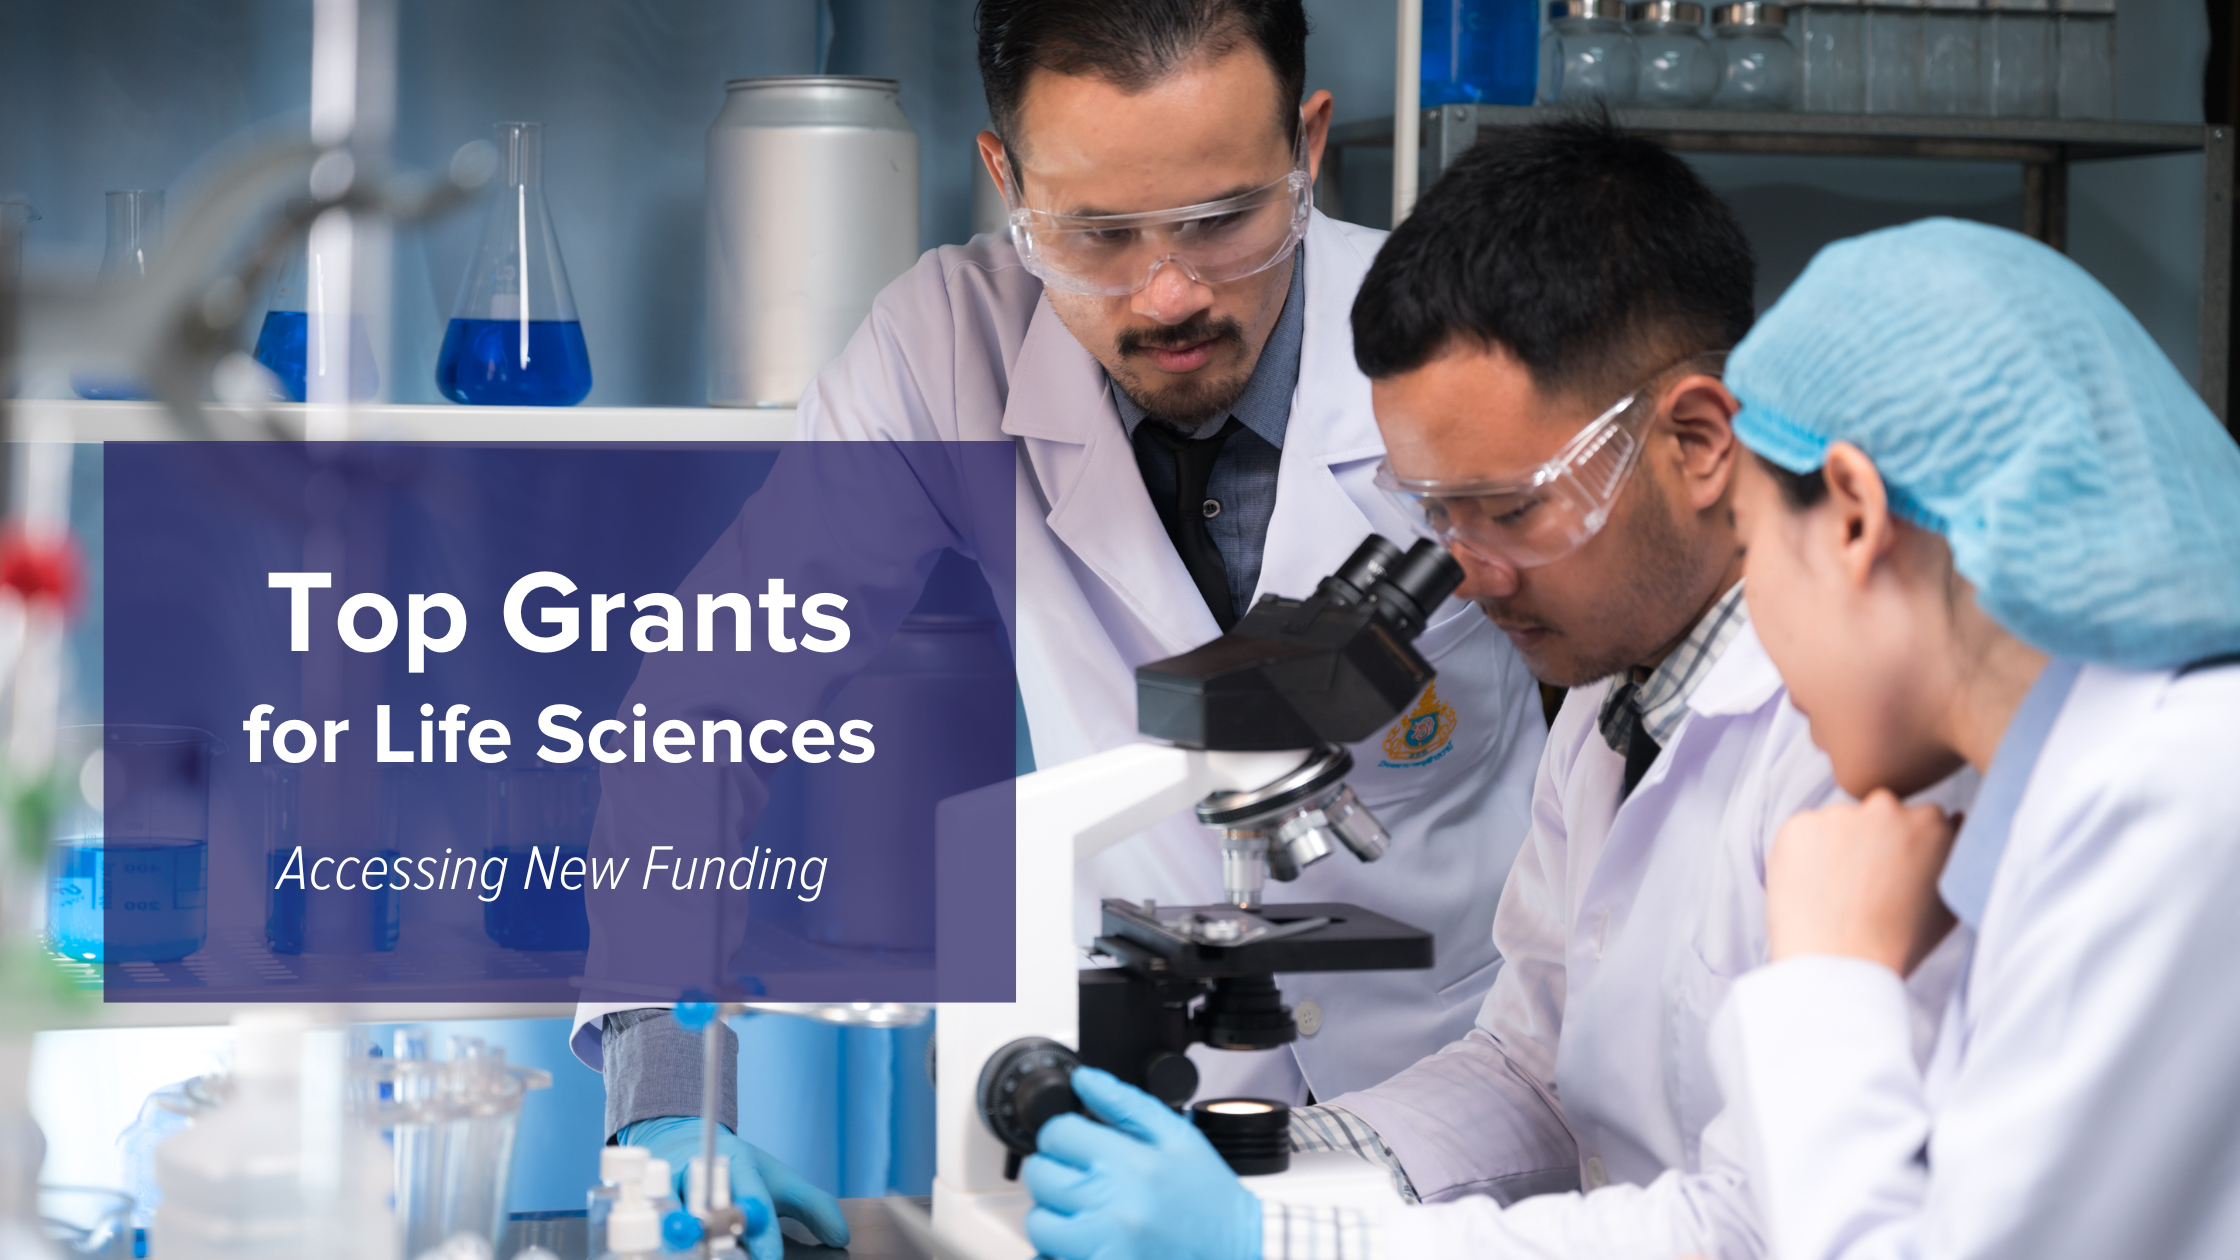 Top Grants for Life Sciences